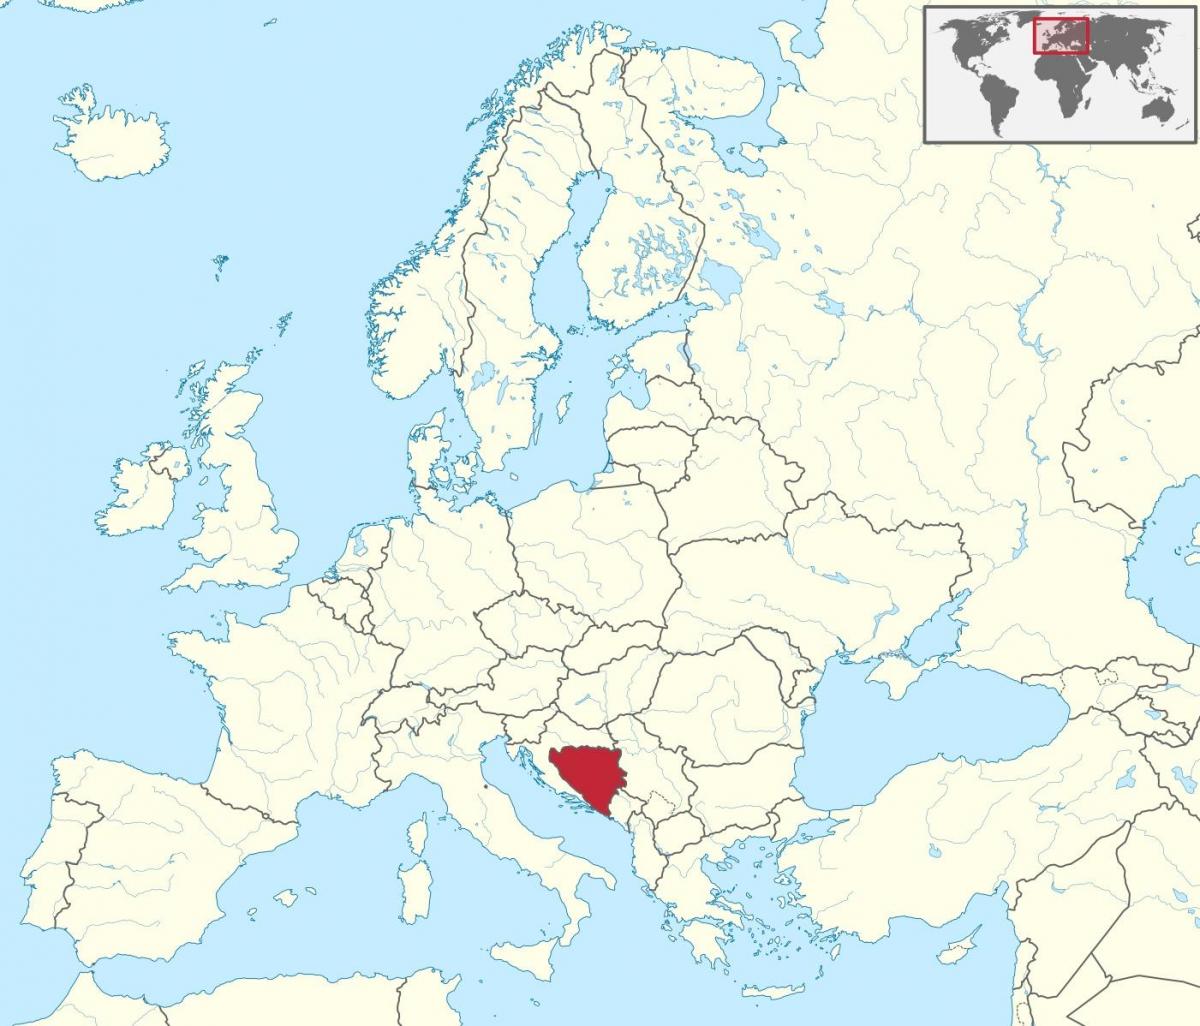 Bosnia on a map of europe